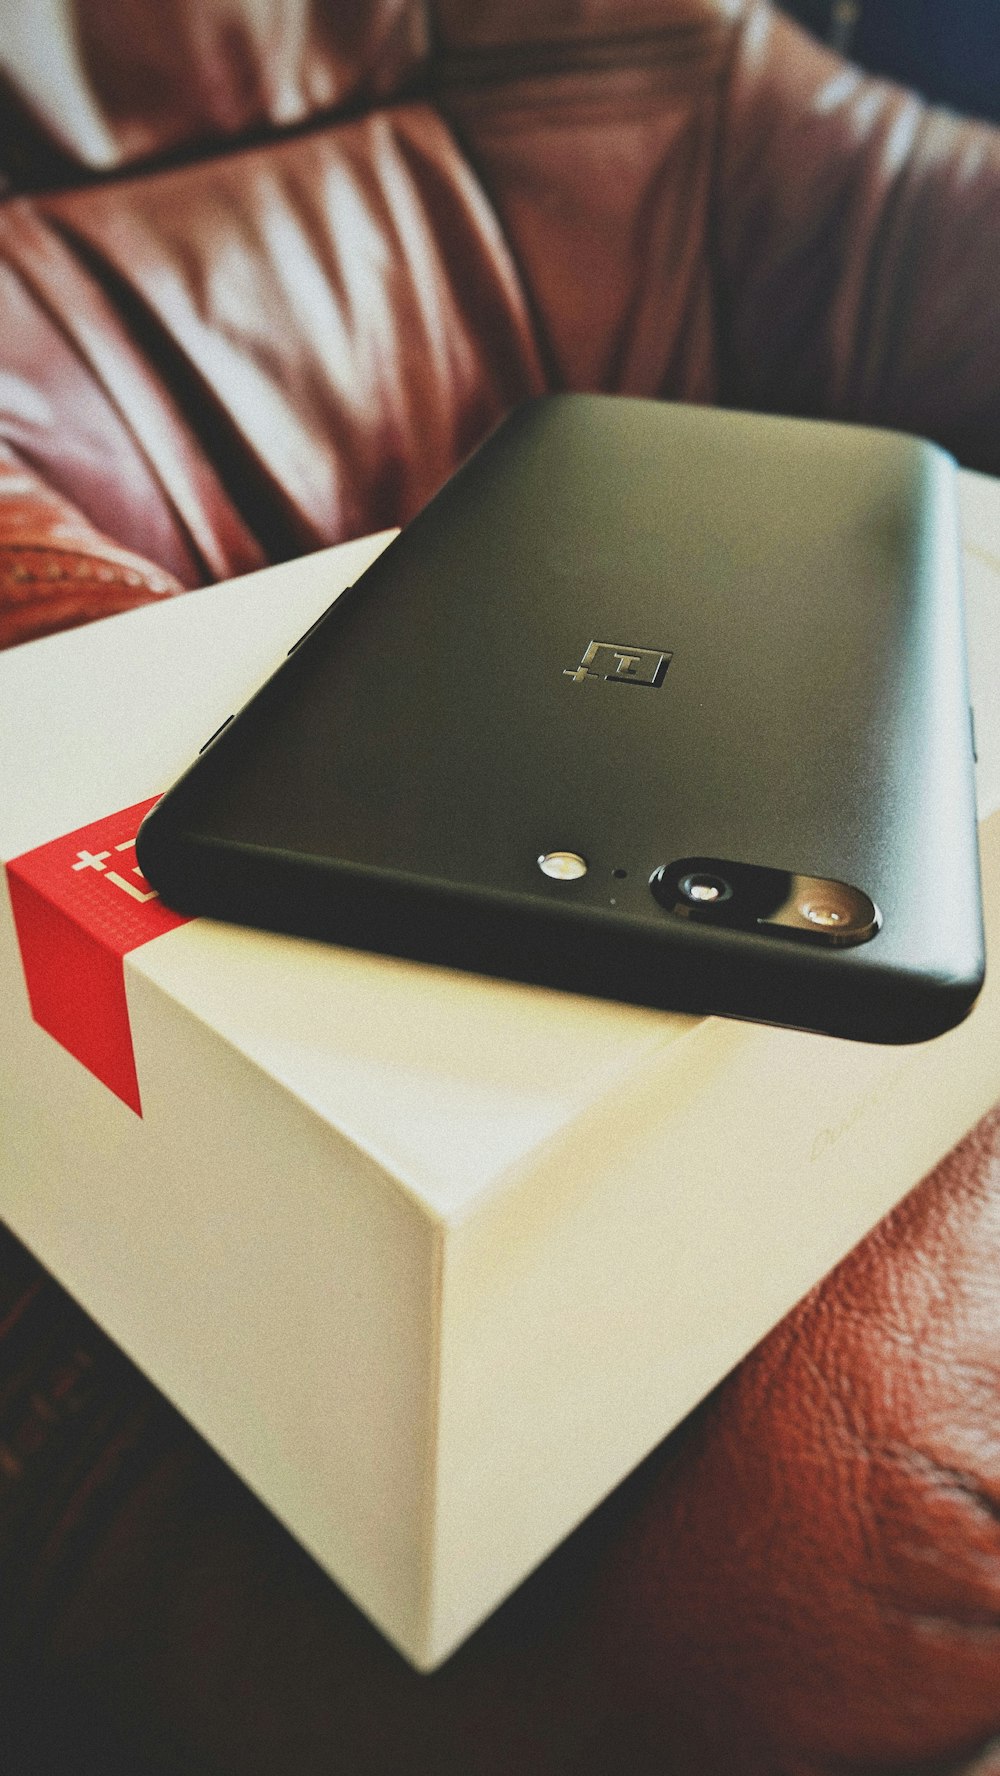 A black smartphone out of its box.